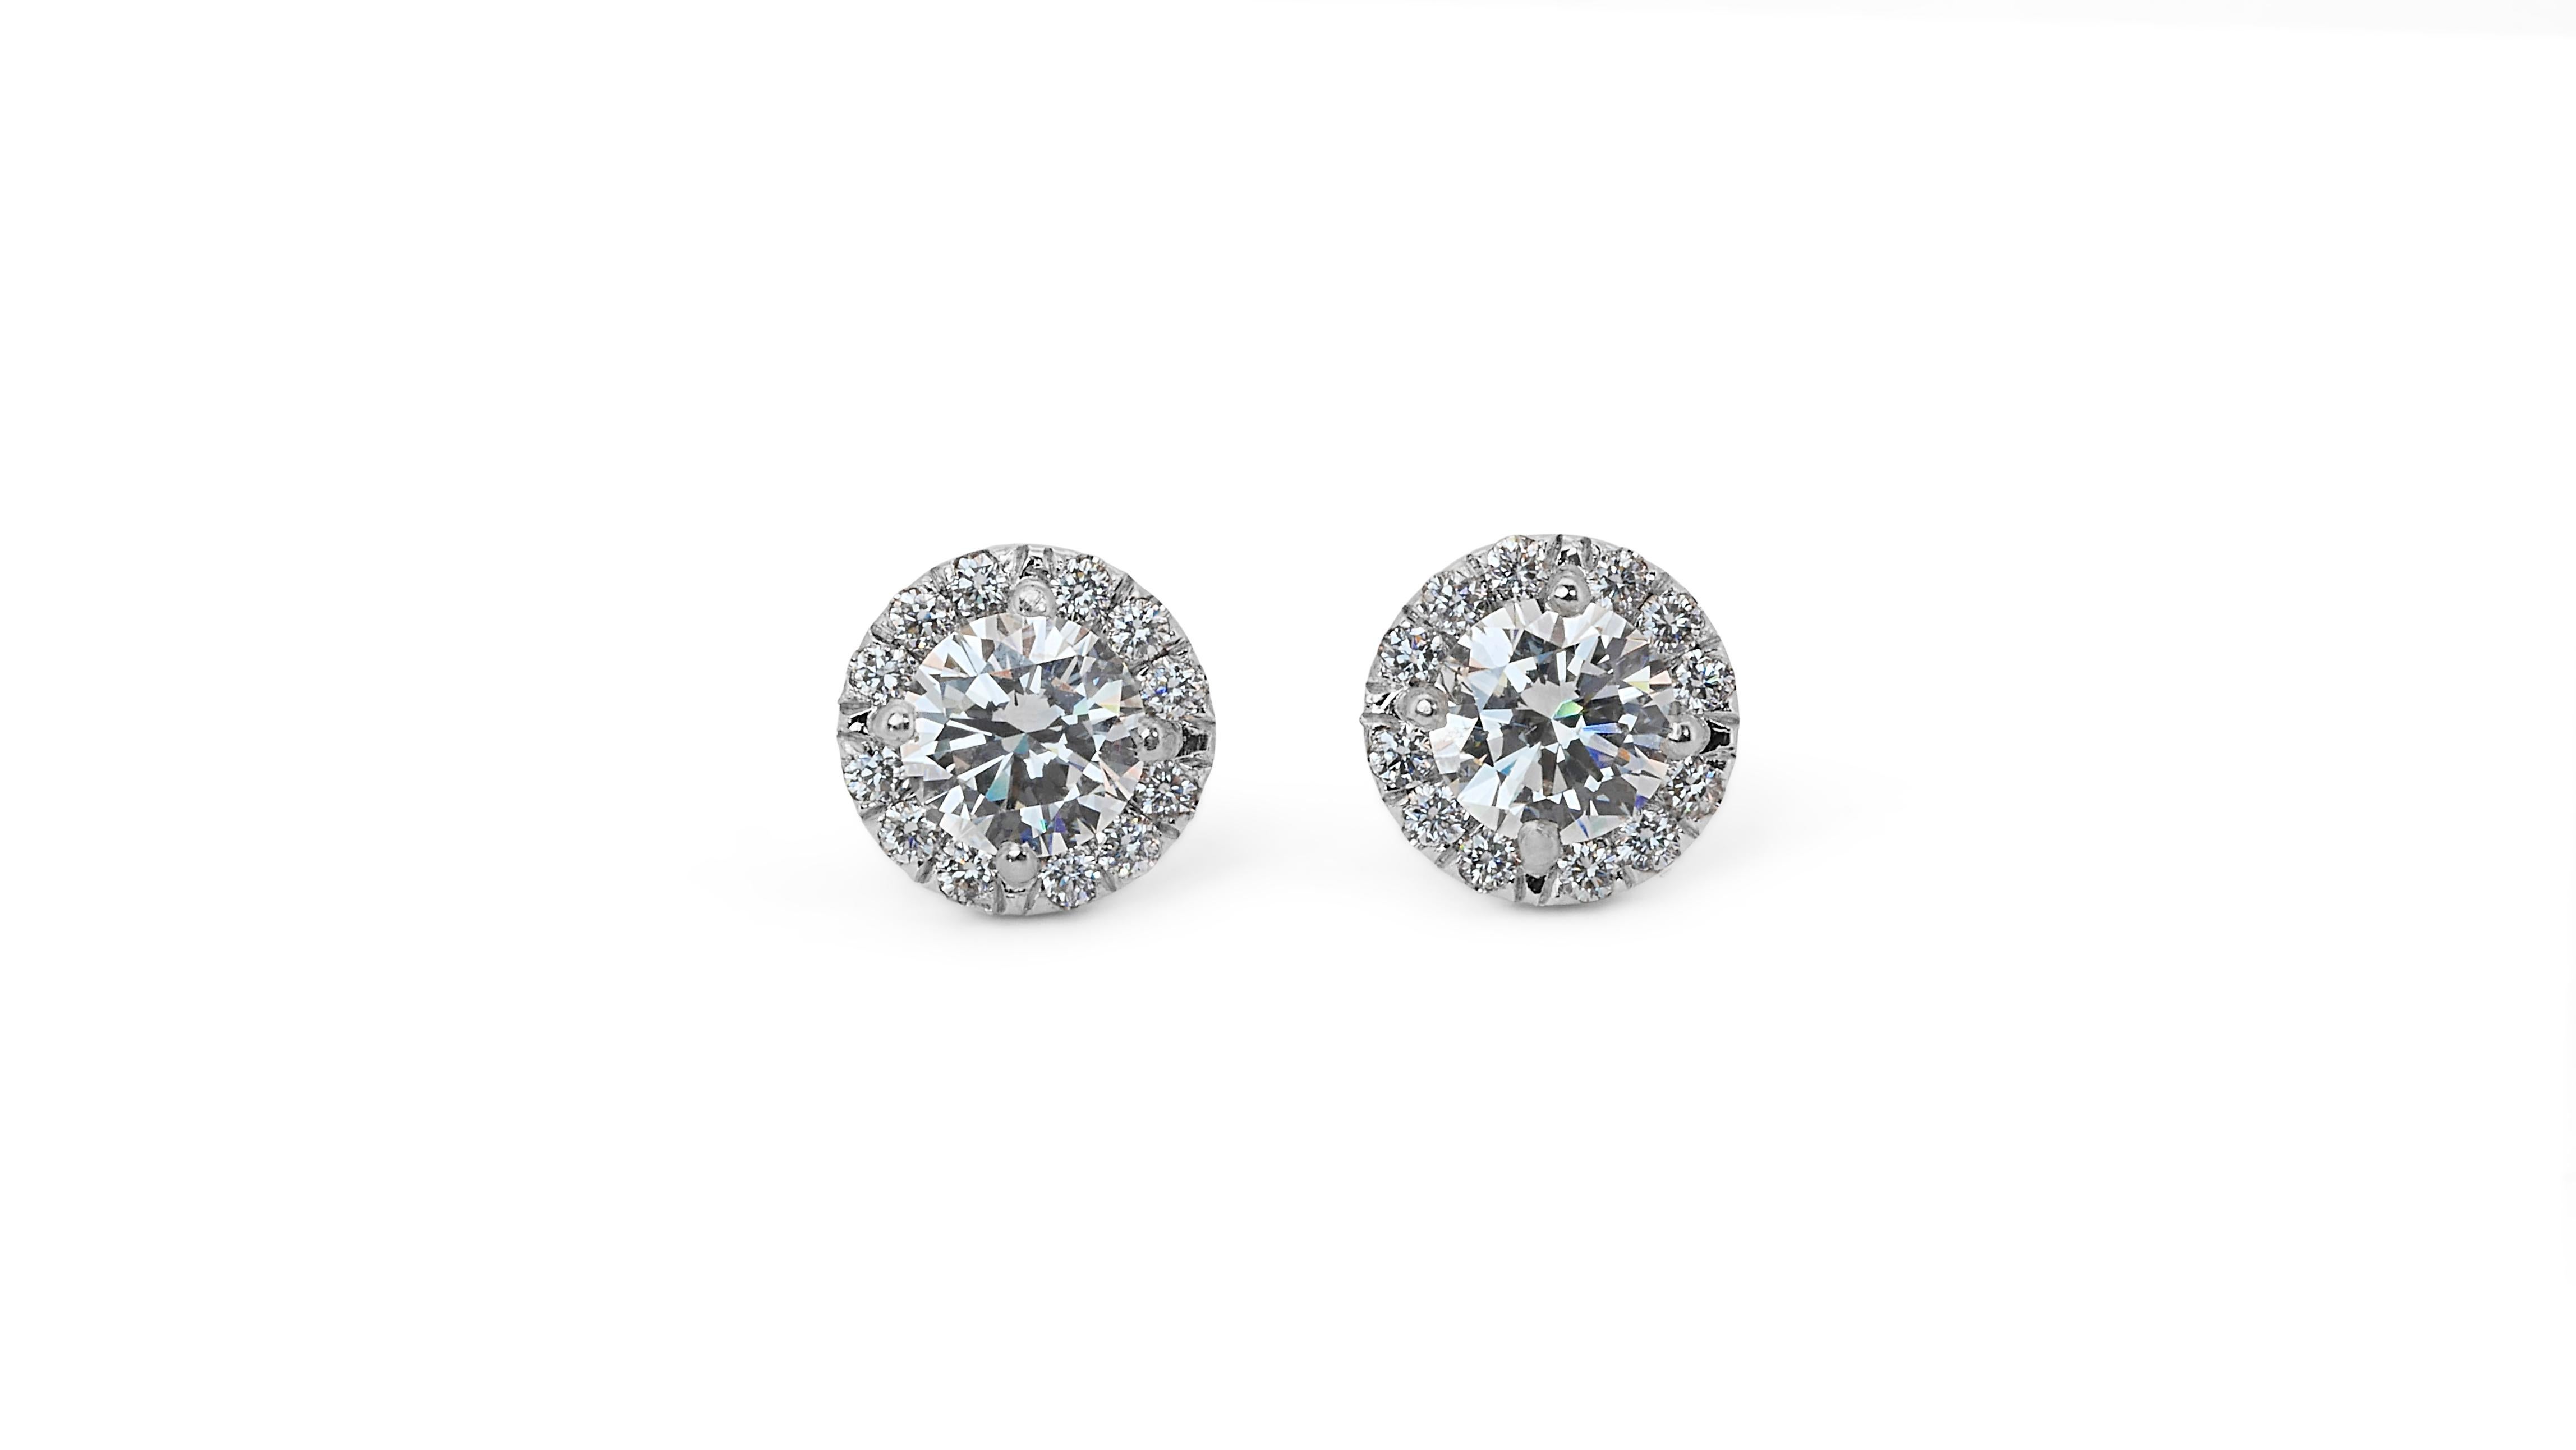 Lustrous 2.57ct Diamond Stud Earrings in 18k White Gold - GIA Certified

These exquisite diamond stud earrings, set in 18k white gold, are designed to capture attention. The main stones are 2 brilliant round diamonds with a combined carat weight of